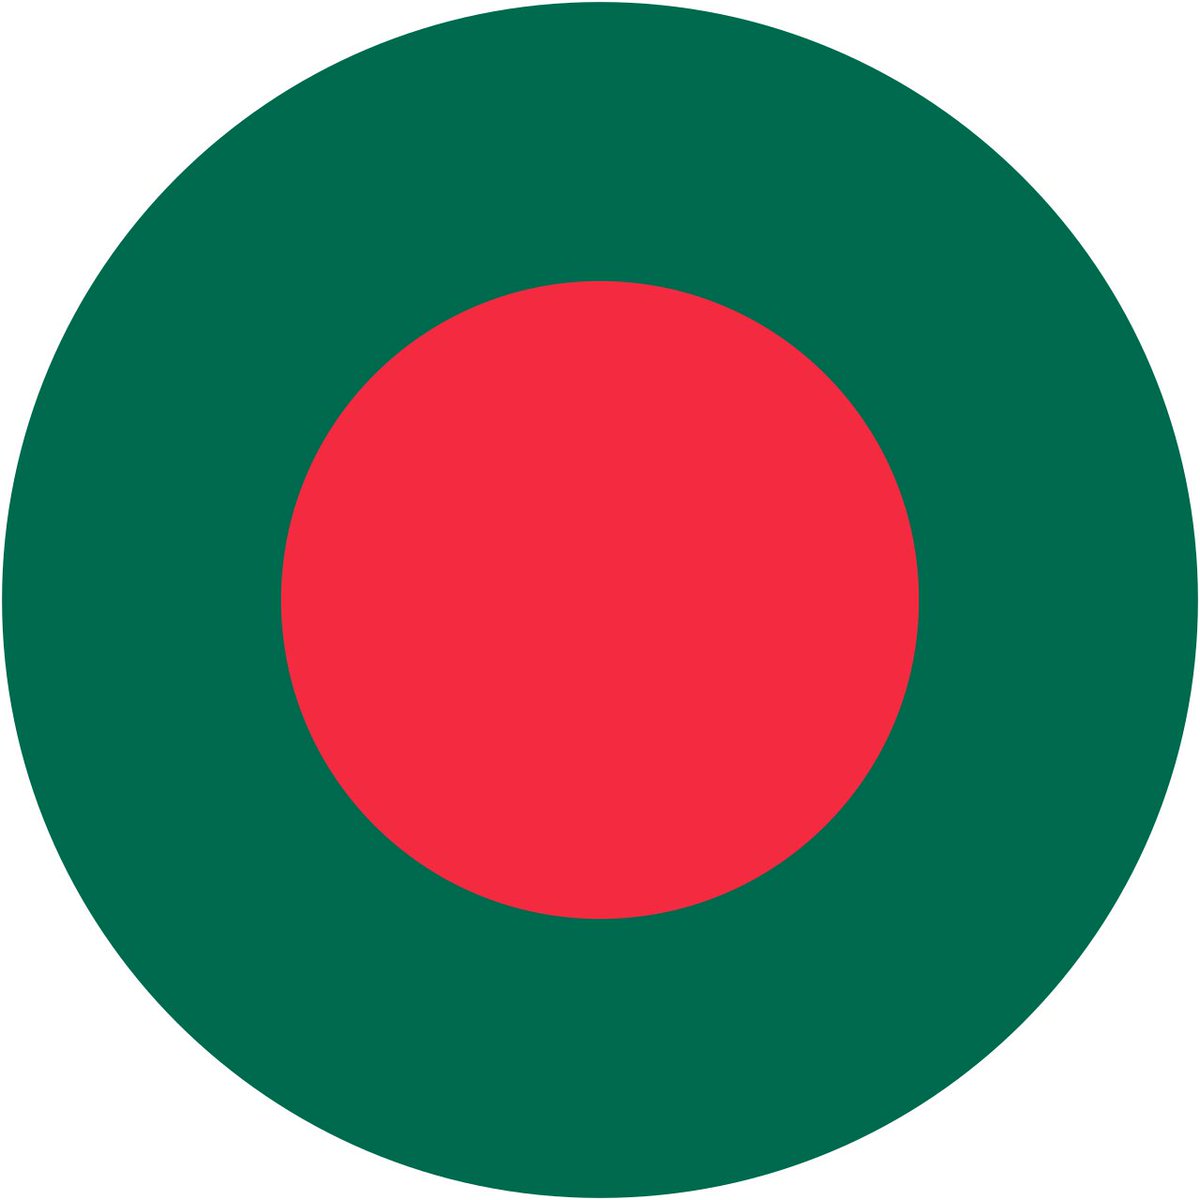 Bangladesh: flag in a circle, but for naval aviation they put whitewalls on it, which is stylish